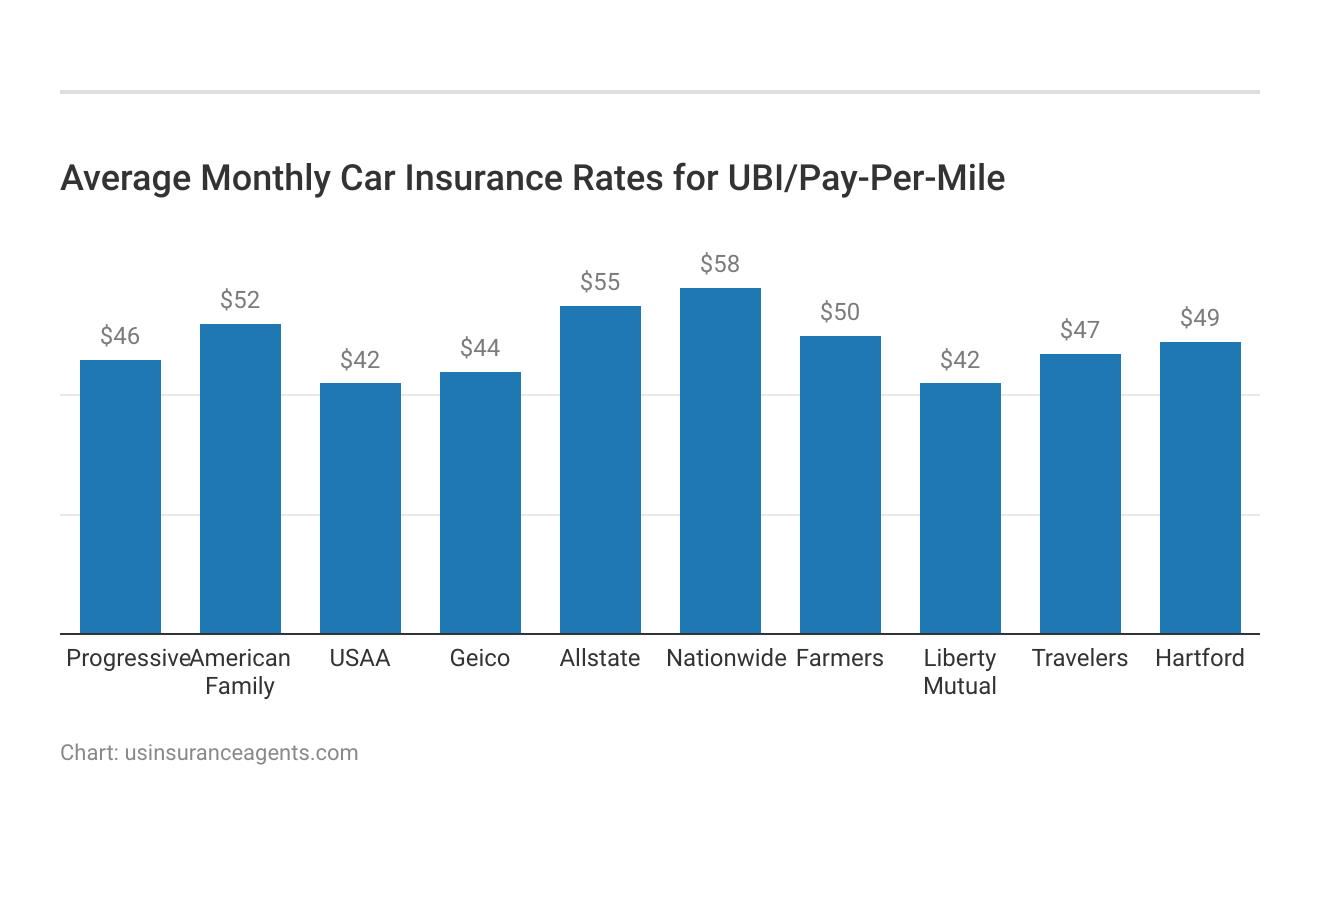 <h3>Average Monthly Car Insurance Rates for UBI/Pay-Per-Mile</h3>